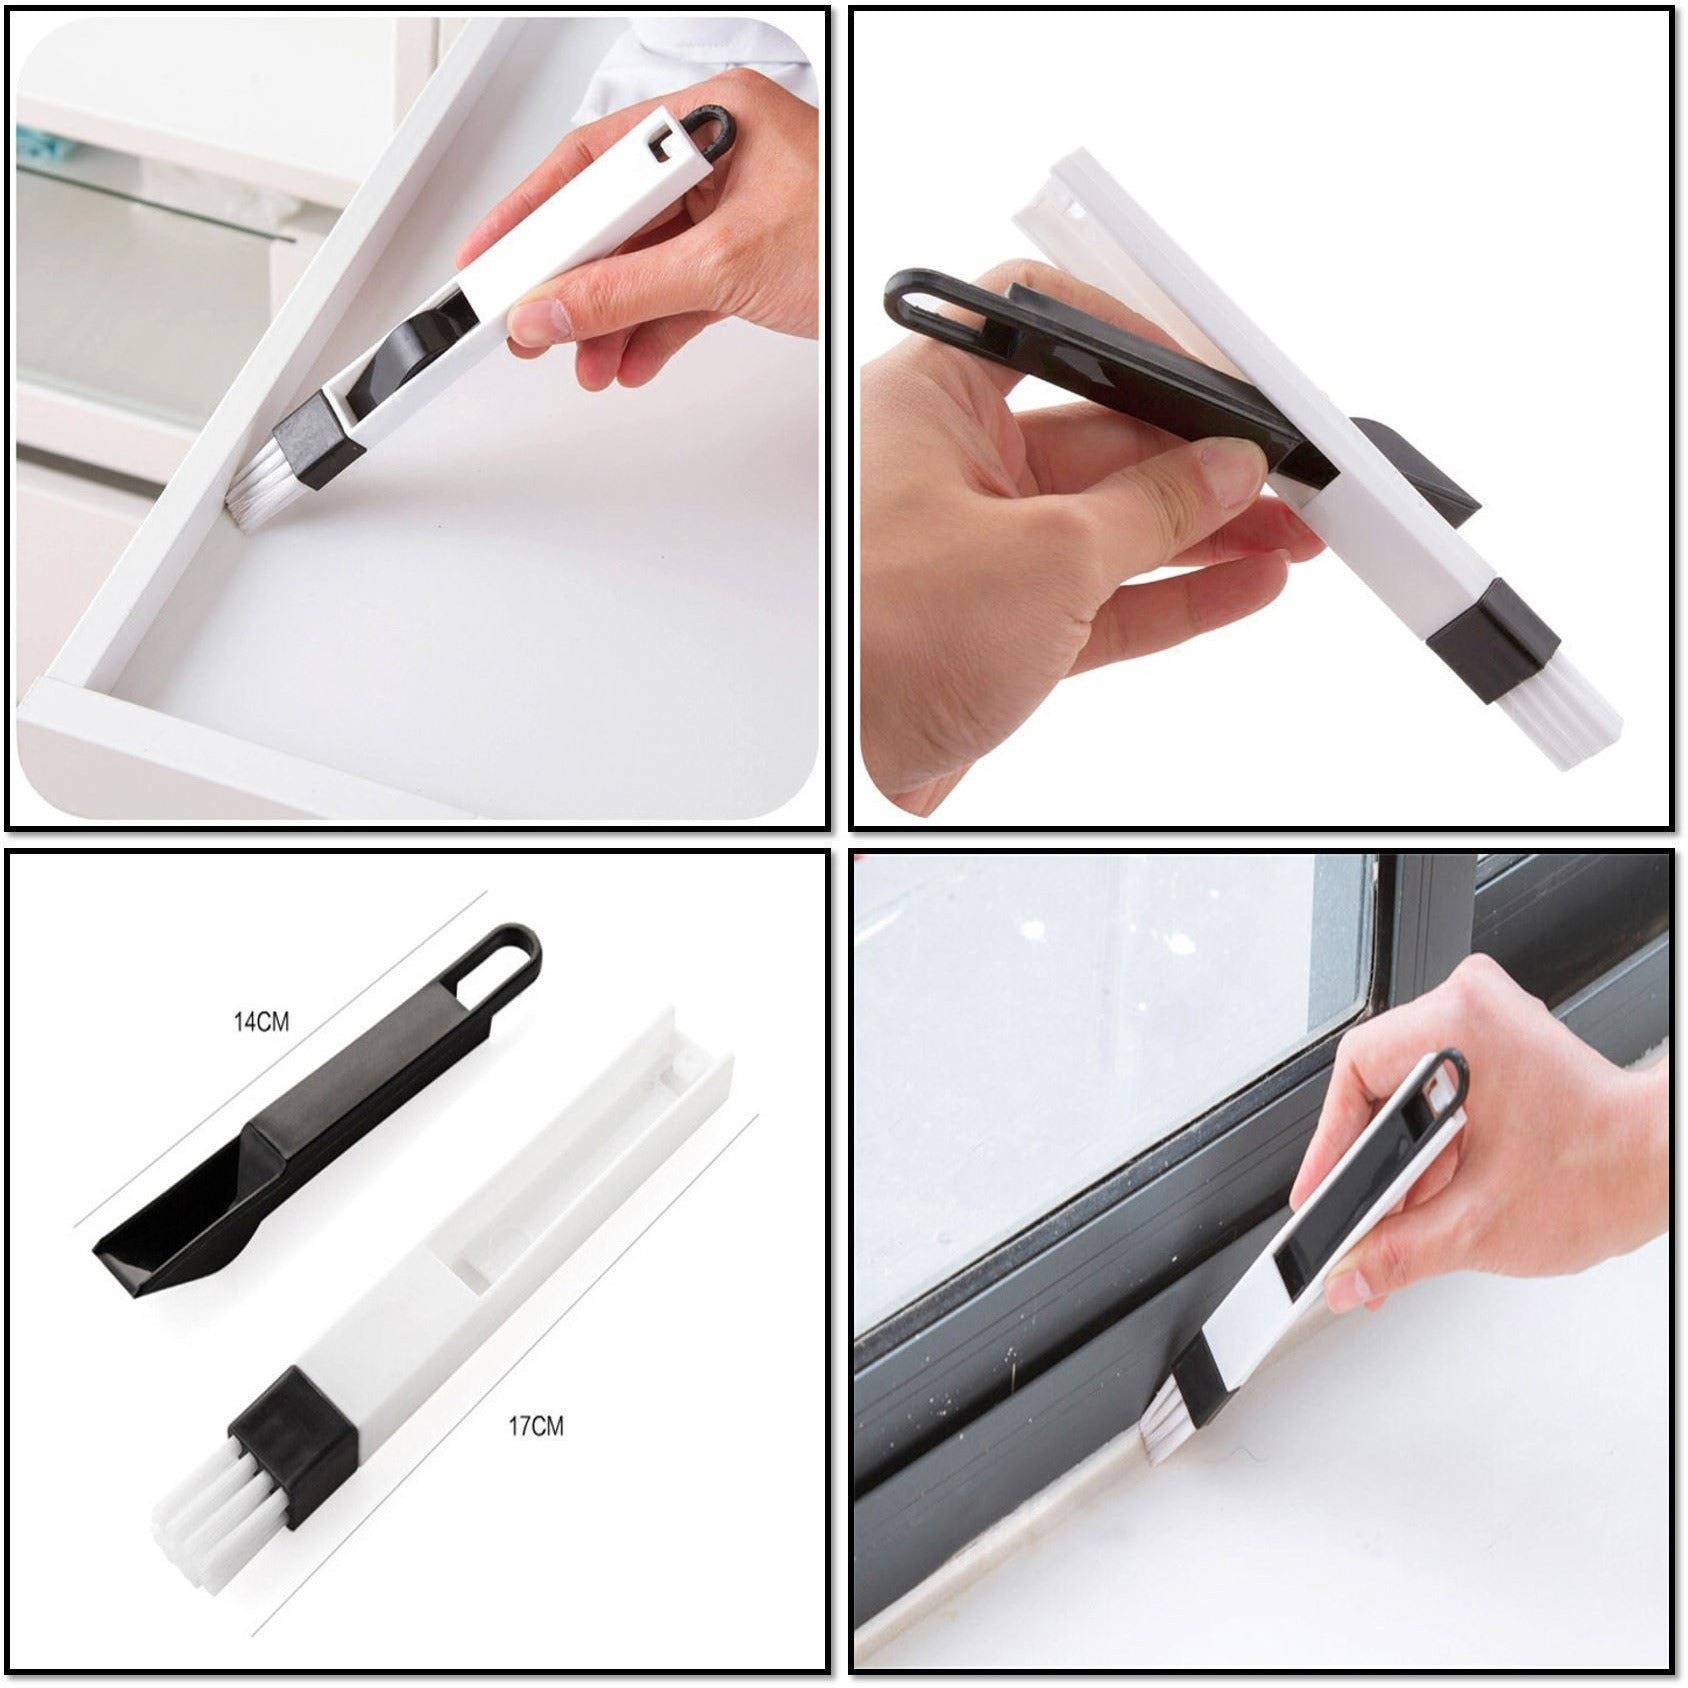 Small Cleaning Brush Micro Dustpan & Brush to Clean Sliding Door Vents Keyboard Etc - The Dustpan and Brush Store